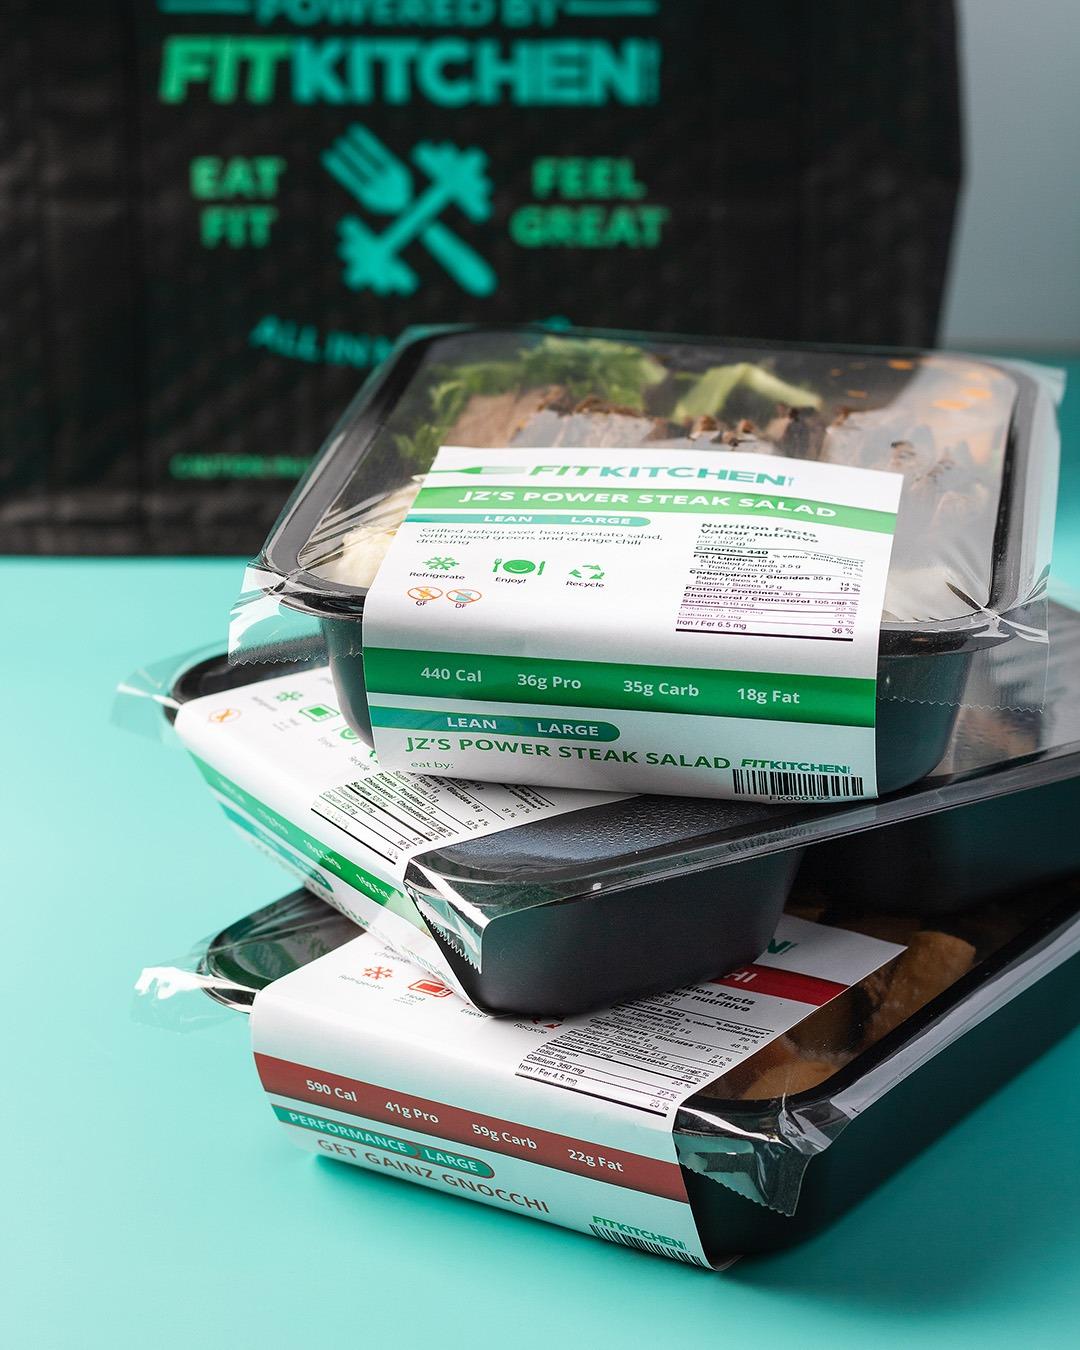 Stack of pre-packaged Fit Kitchen meals